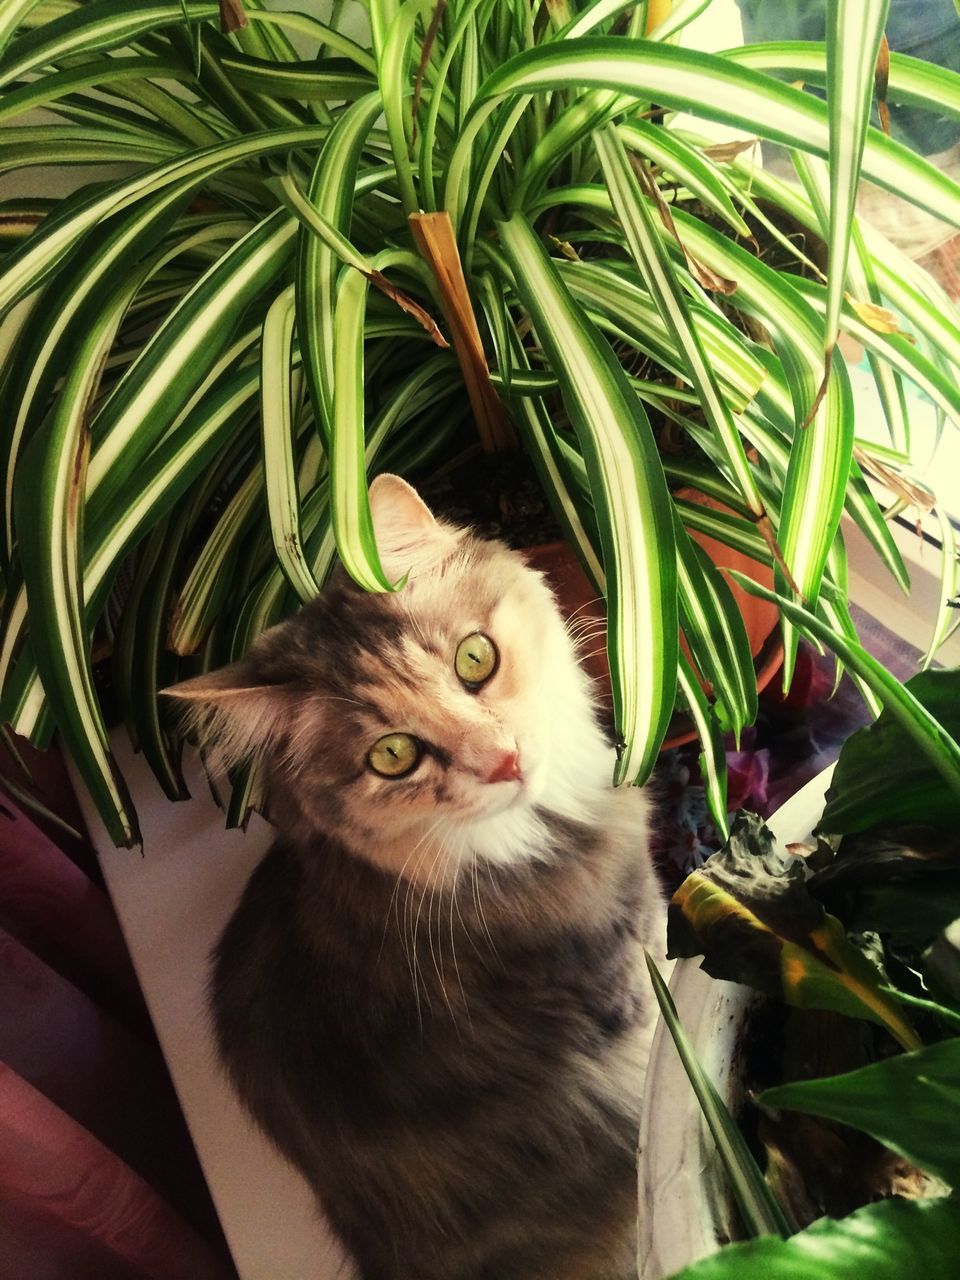 domestic cat, cat, pets, animal themes, mammal, one animal, domestic animals, feline, whisker, plant, leaf, looking at camera, portrait, growth, green color, potted plant, close-up, front or back yard, sitting, no people